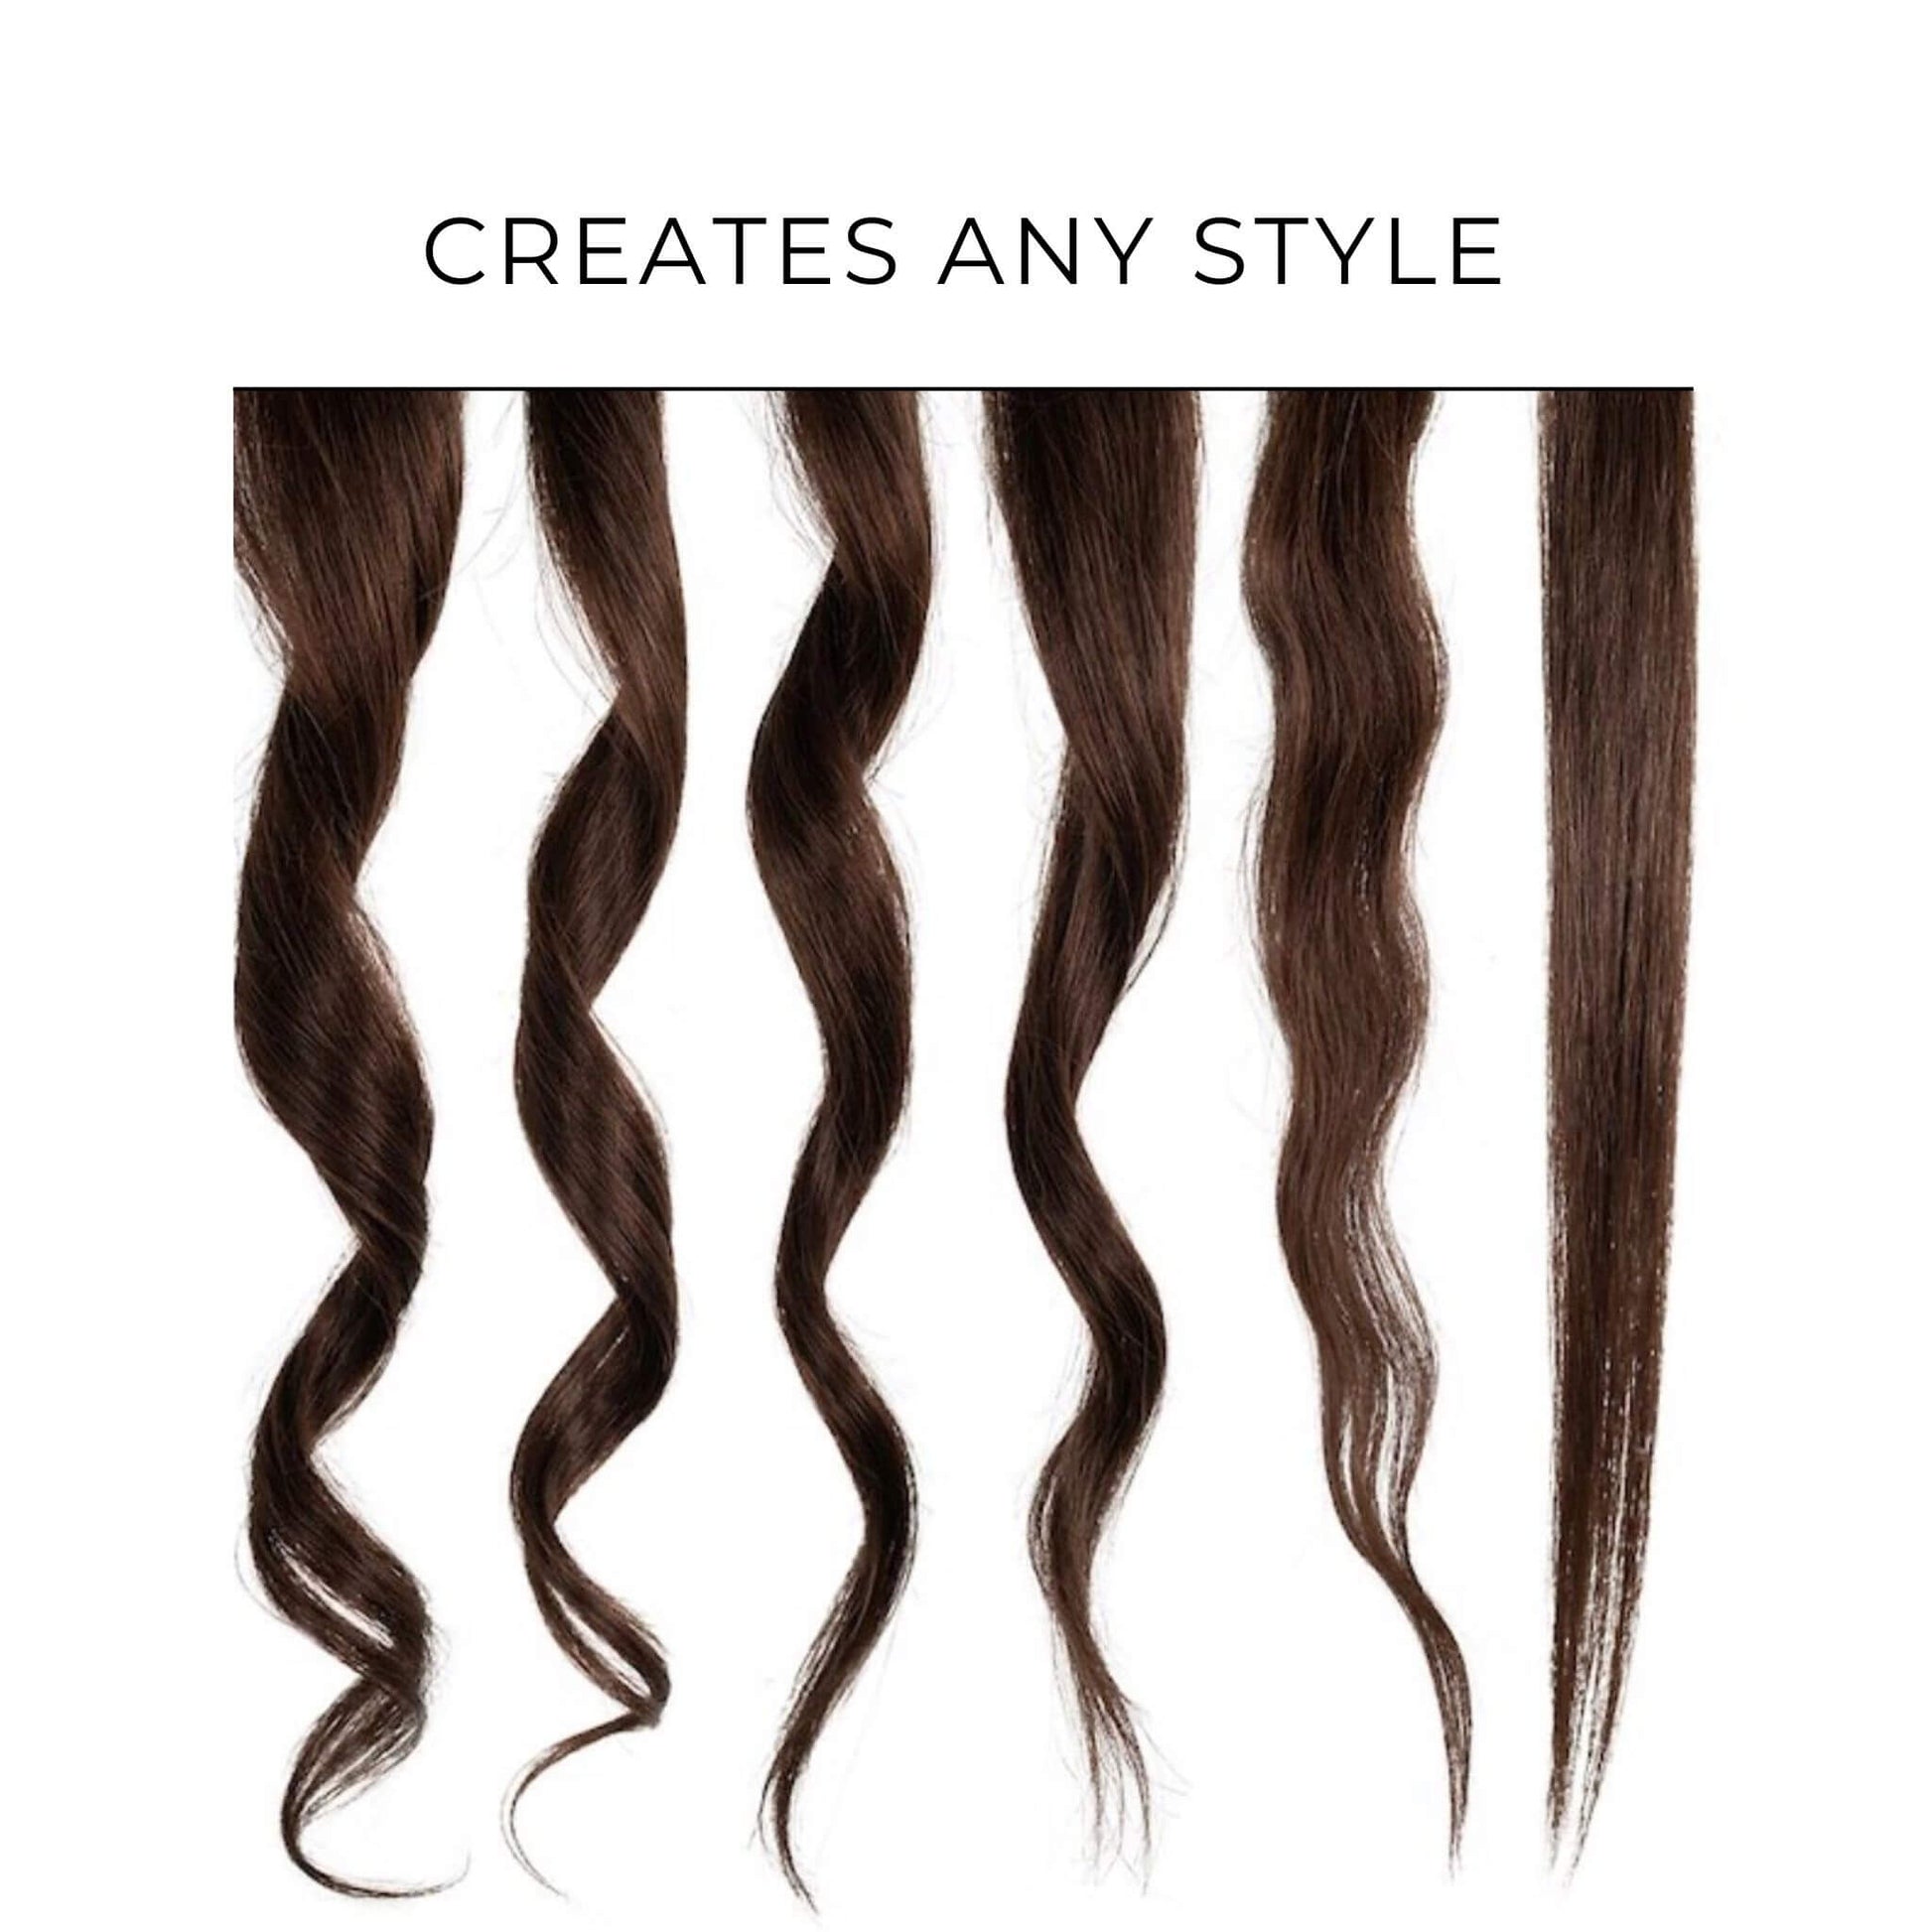 Many of the styles that can be created using the TYME Iron Pro: Aura.